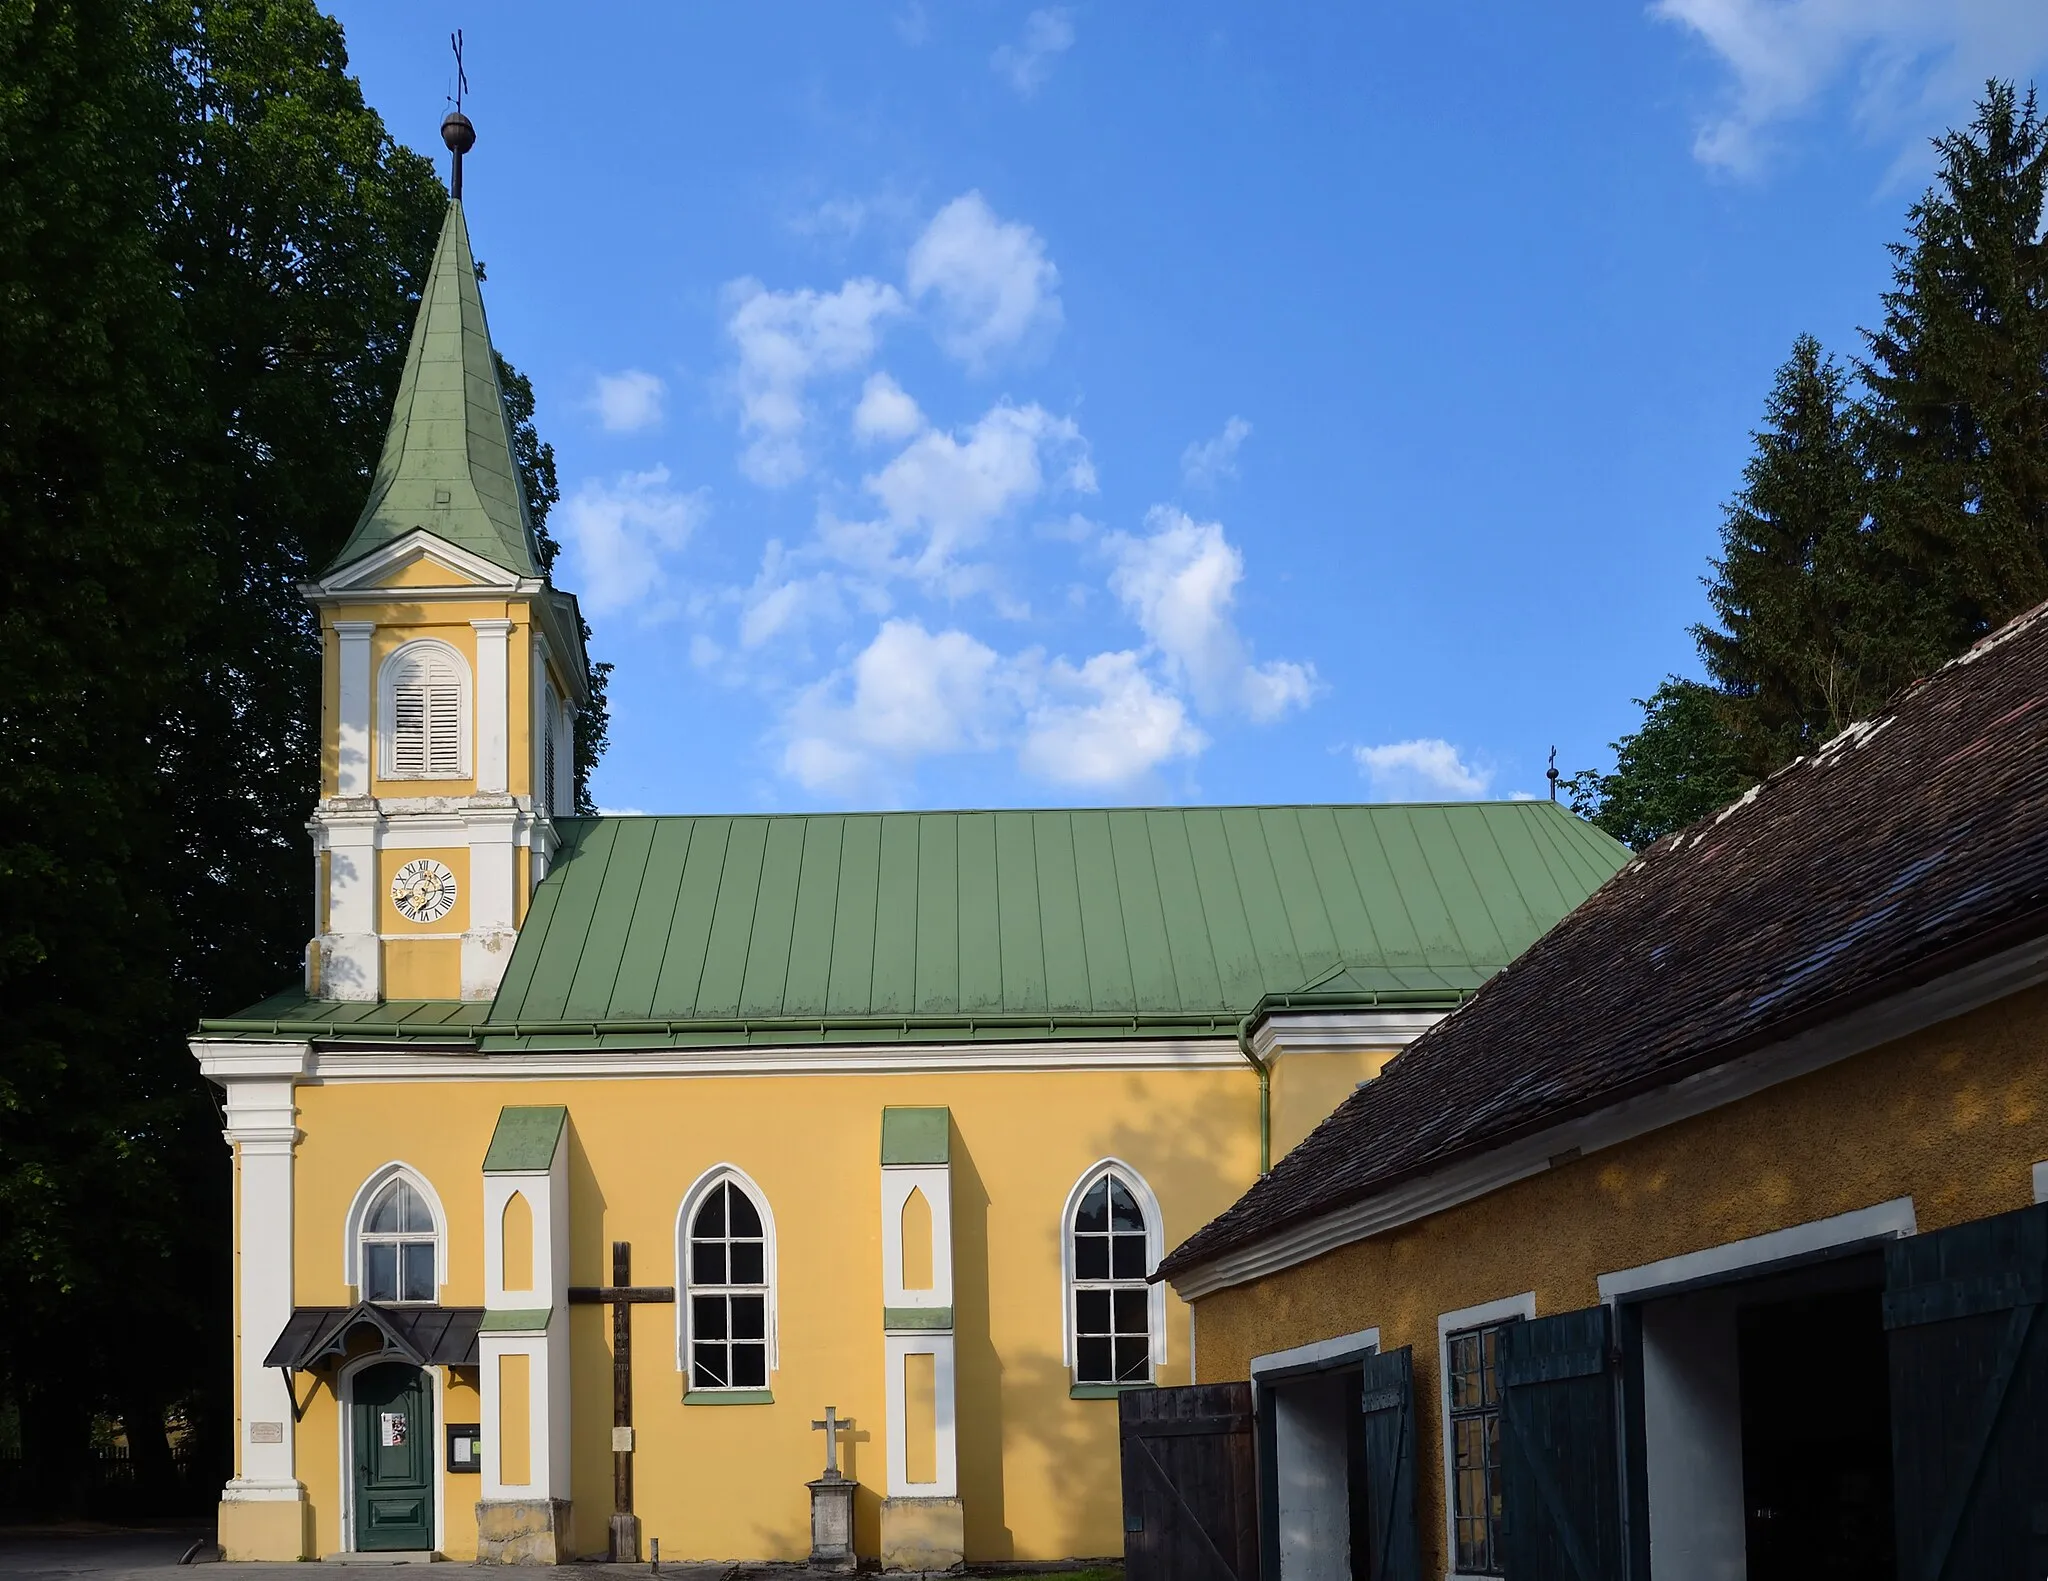 Photo showing: The parish church Assumption of Mary in Wald, municipality of Pyhra, Lower Austria, is protected as a cultural heritage monument.